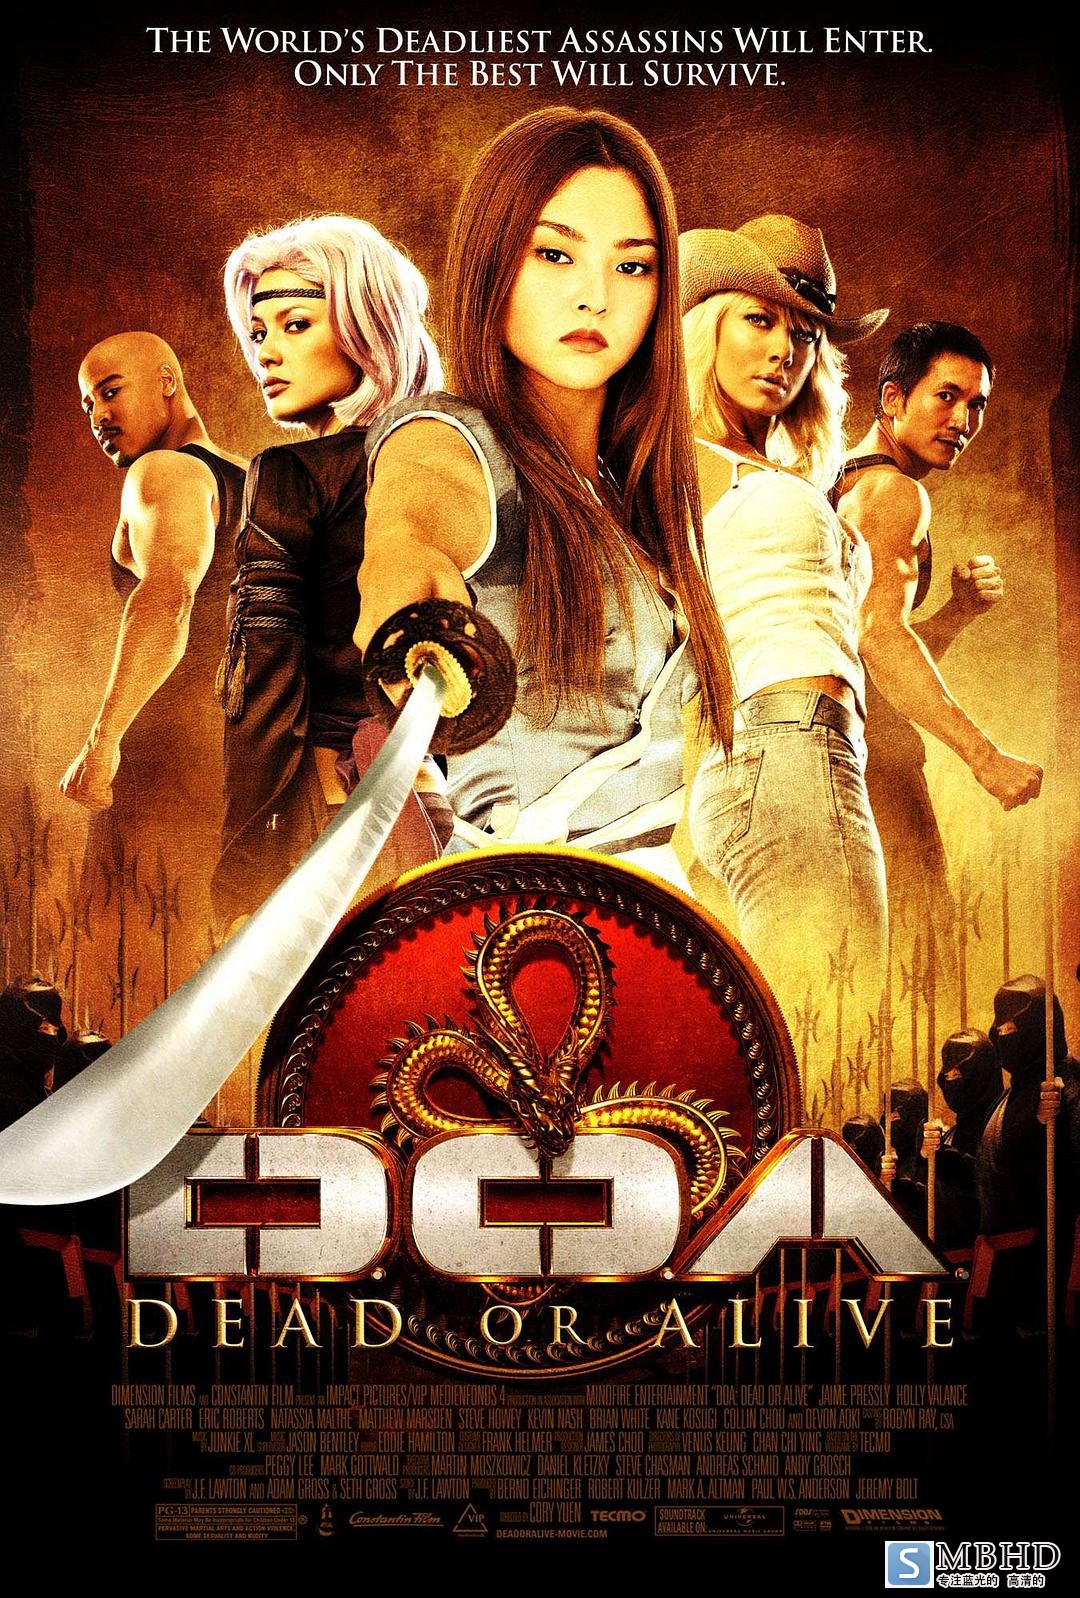  D.O.A.Dead.or.Alive.2006.1080p.BluRay.x264-METiS 6.56GB-1.png